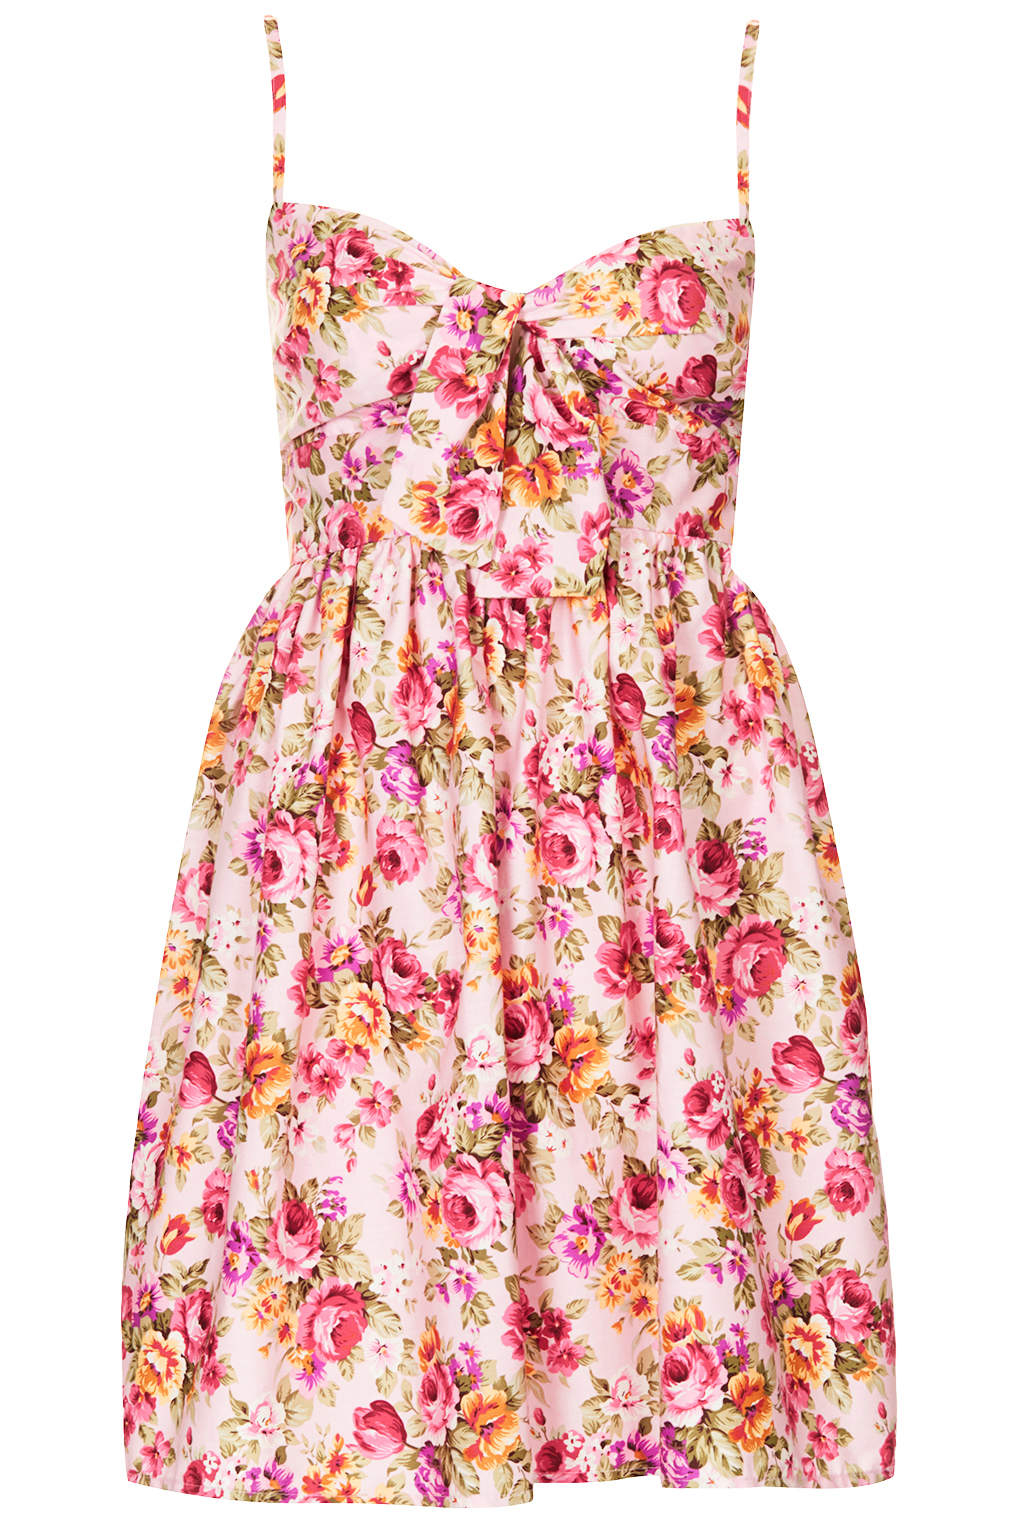 Lyst - Topshop Womens Floral Tie Front Babydoll Dress By Annie ...